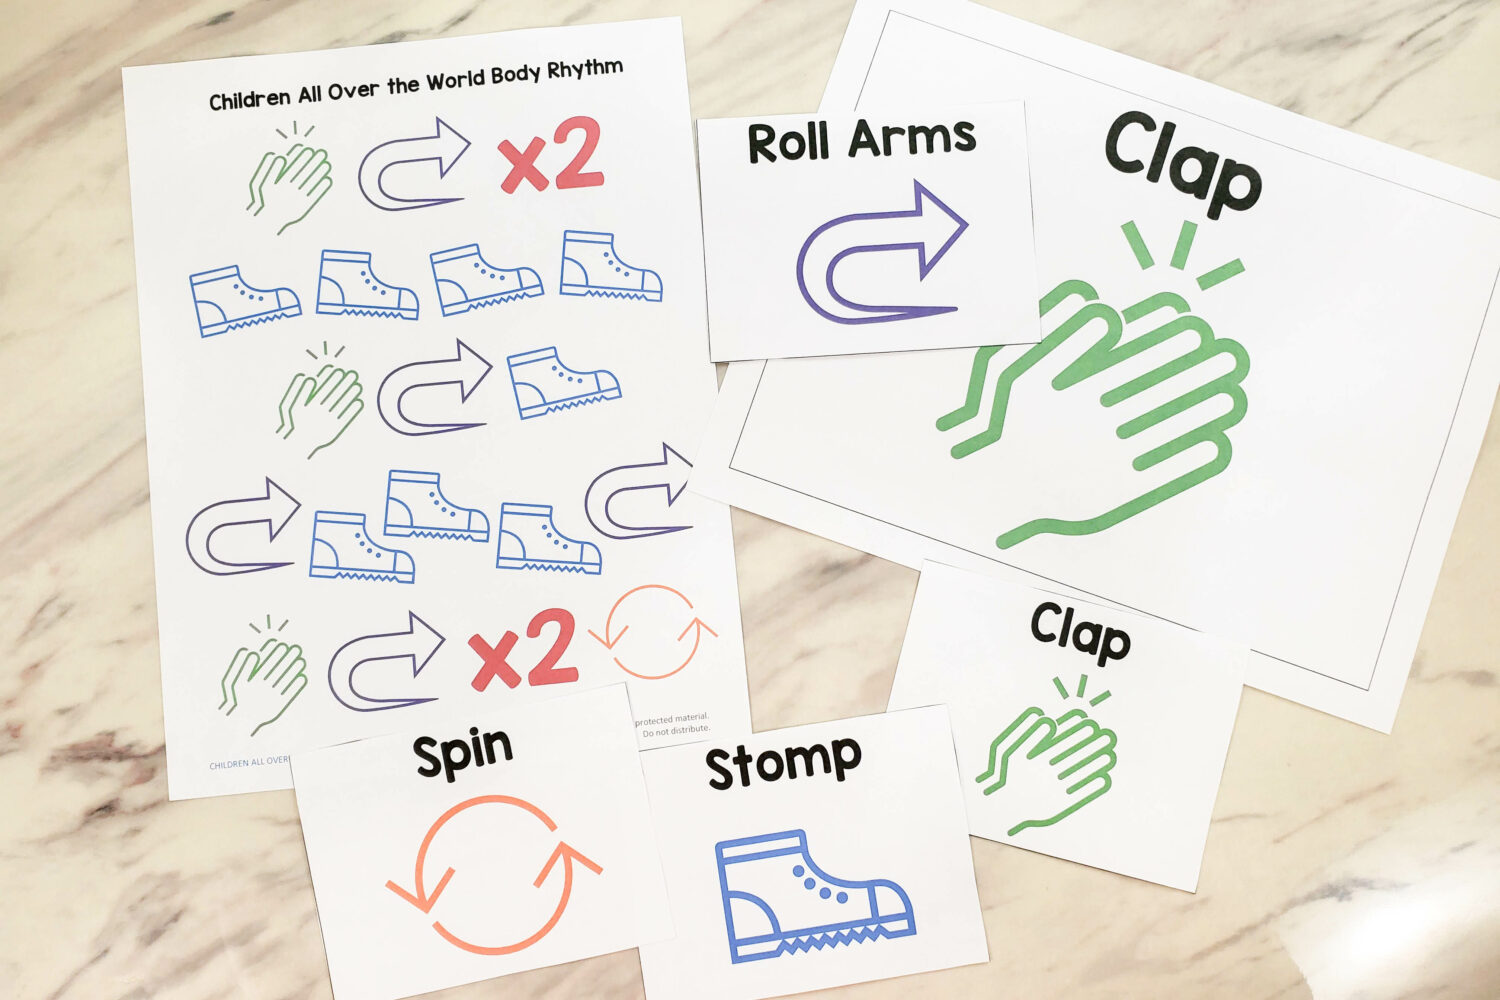 Children All Over the World Body Rhythm singing time idea! Use this pattern with claps, stomps, and rolling your arms that follows along with the lyrics to add purposeful movement! Includes printable song helps for LDS Primary Music Leaders teaching this song.